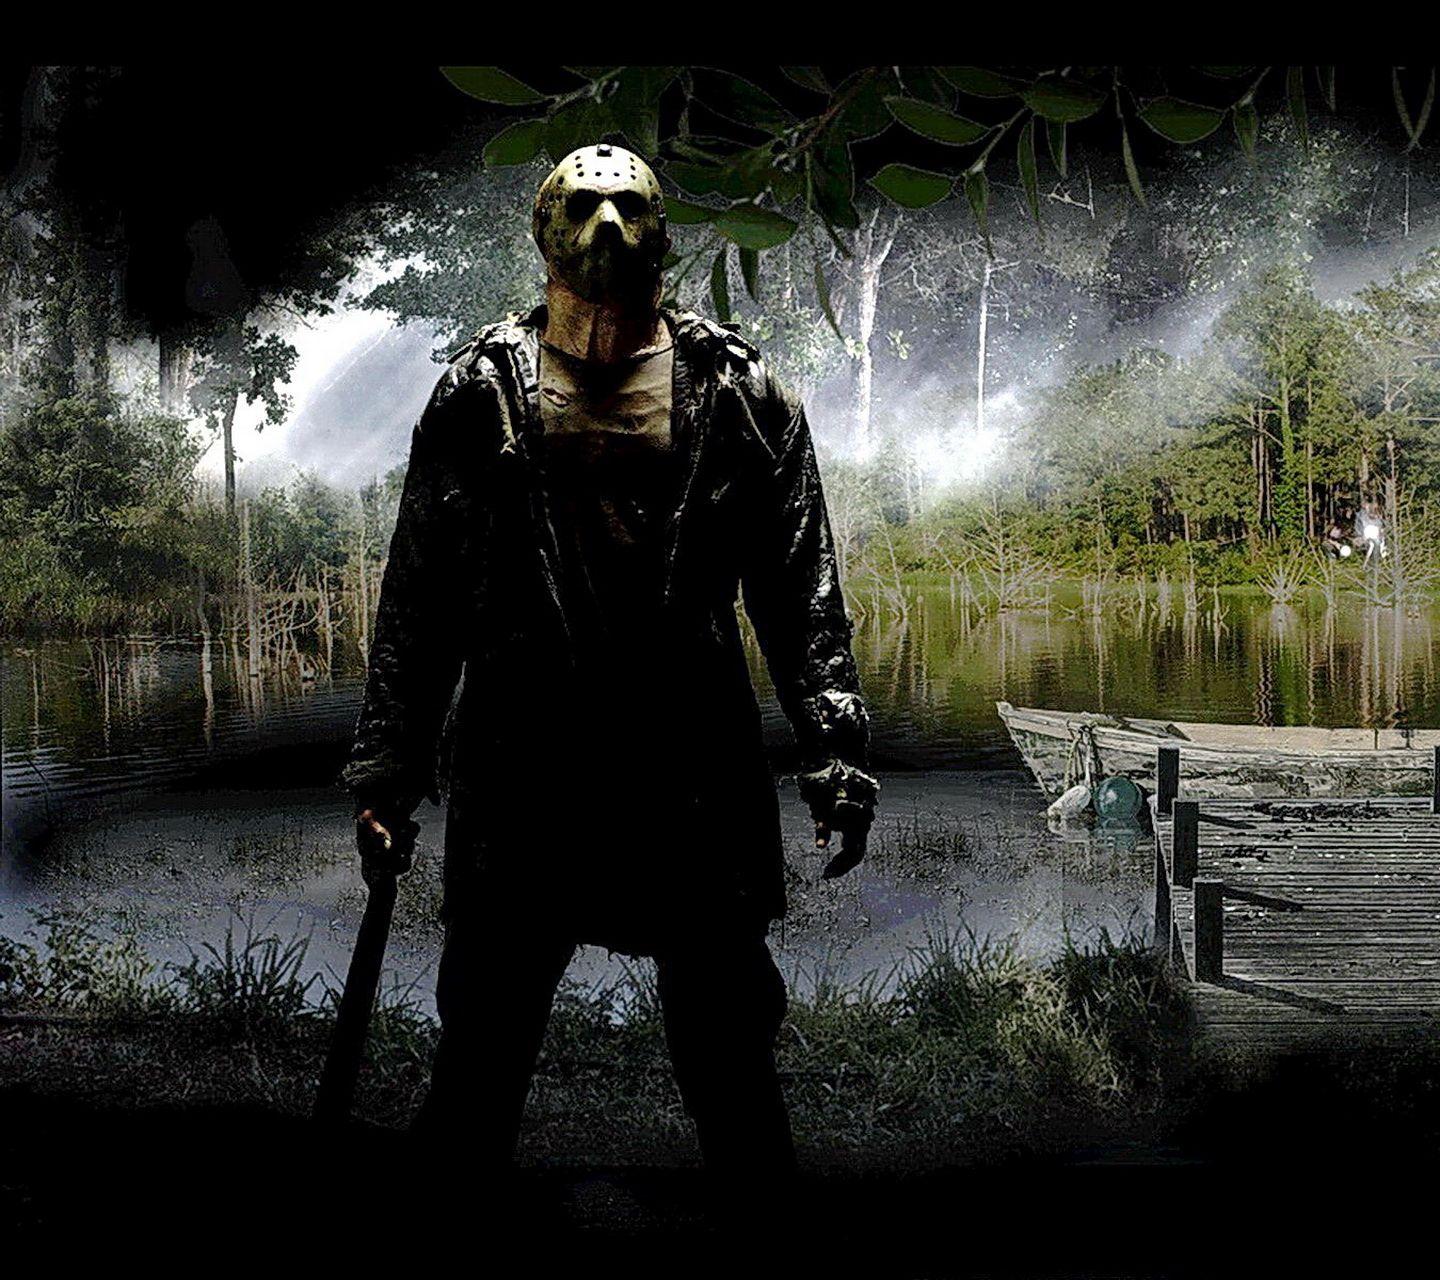 friday the 13th mac download free